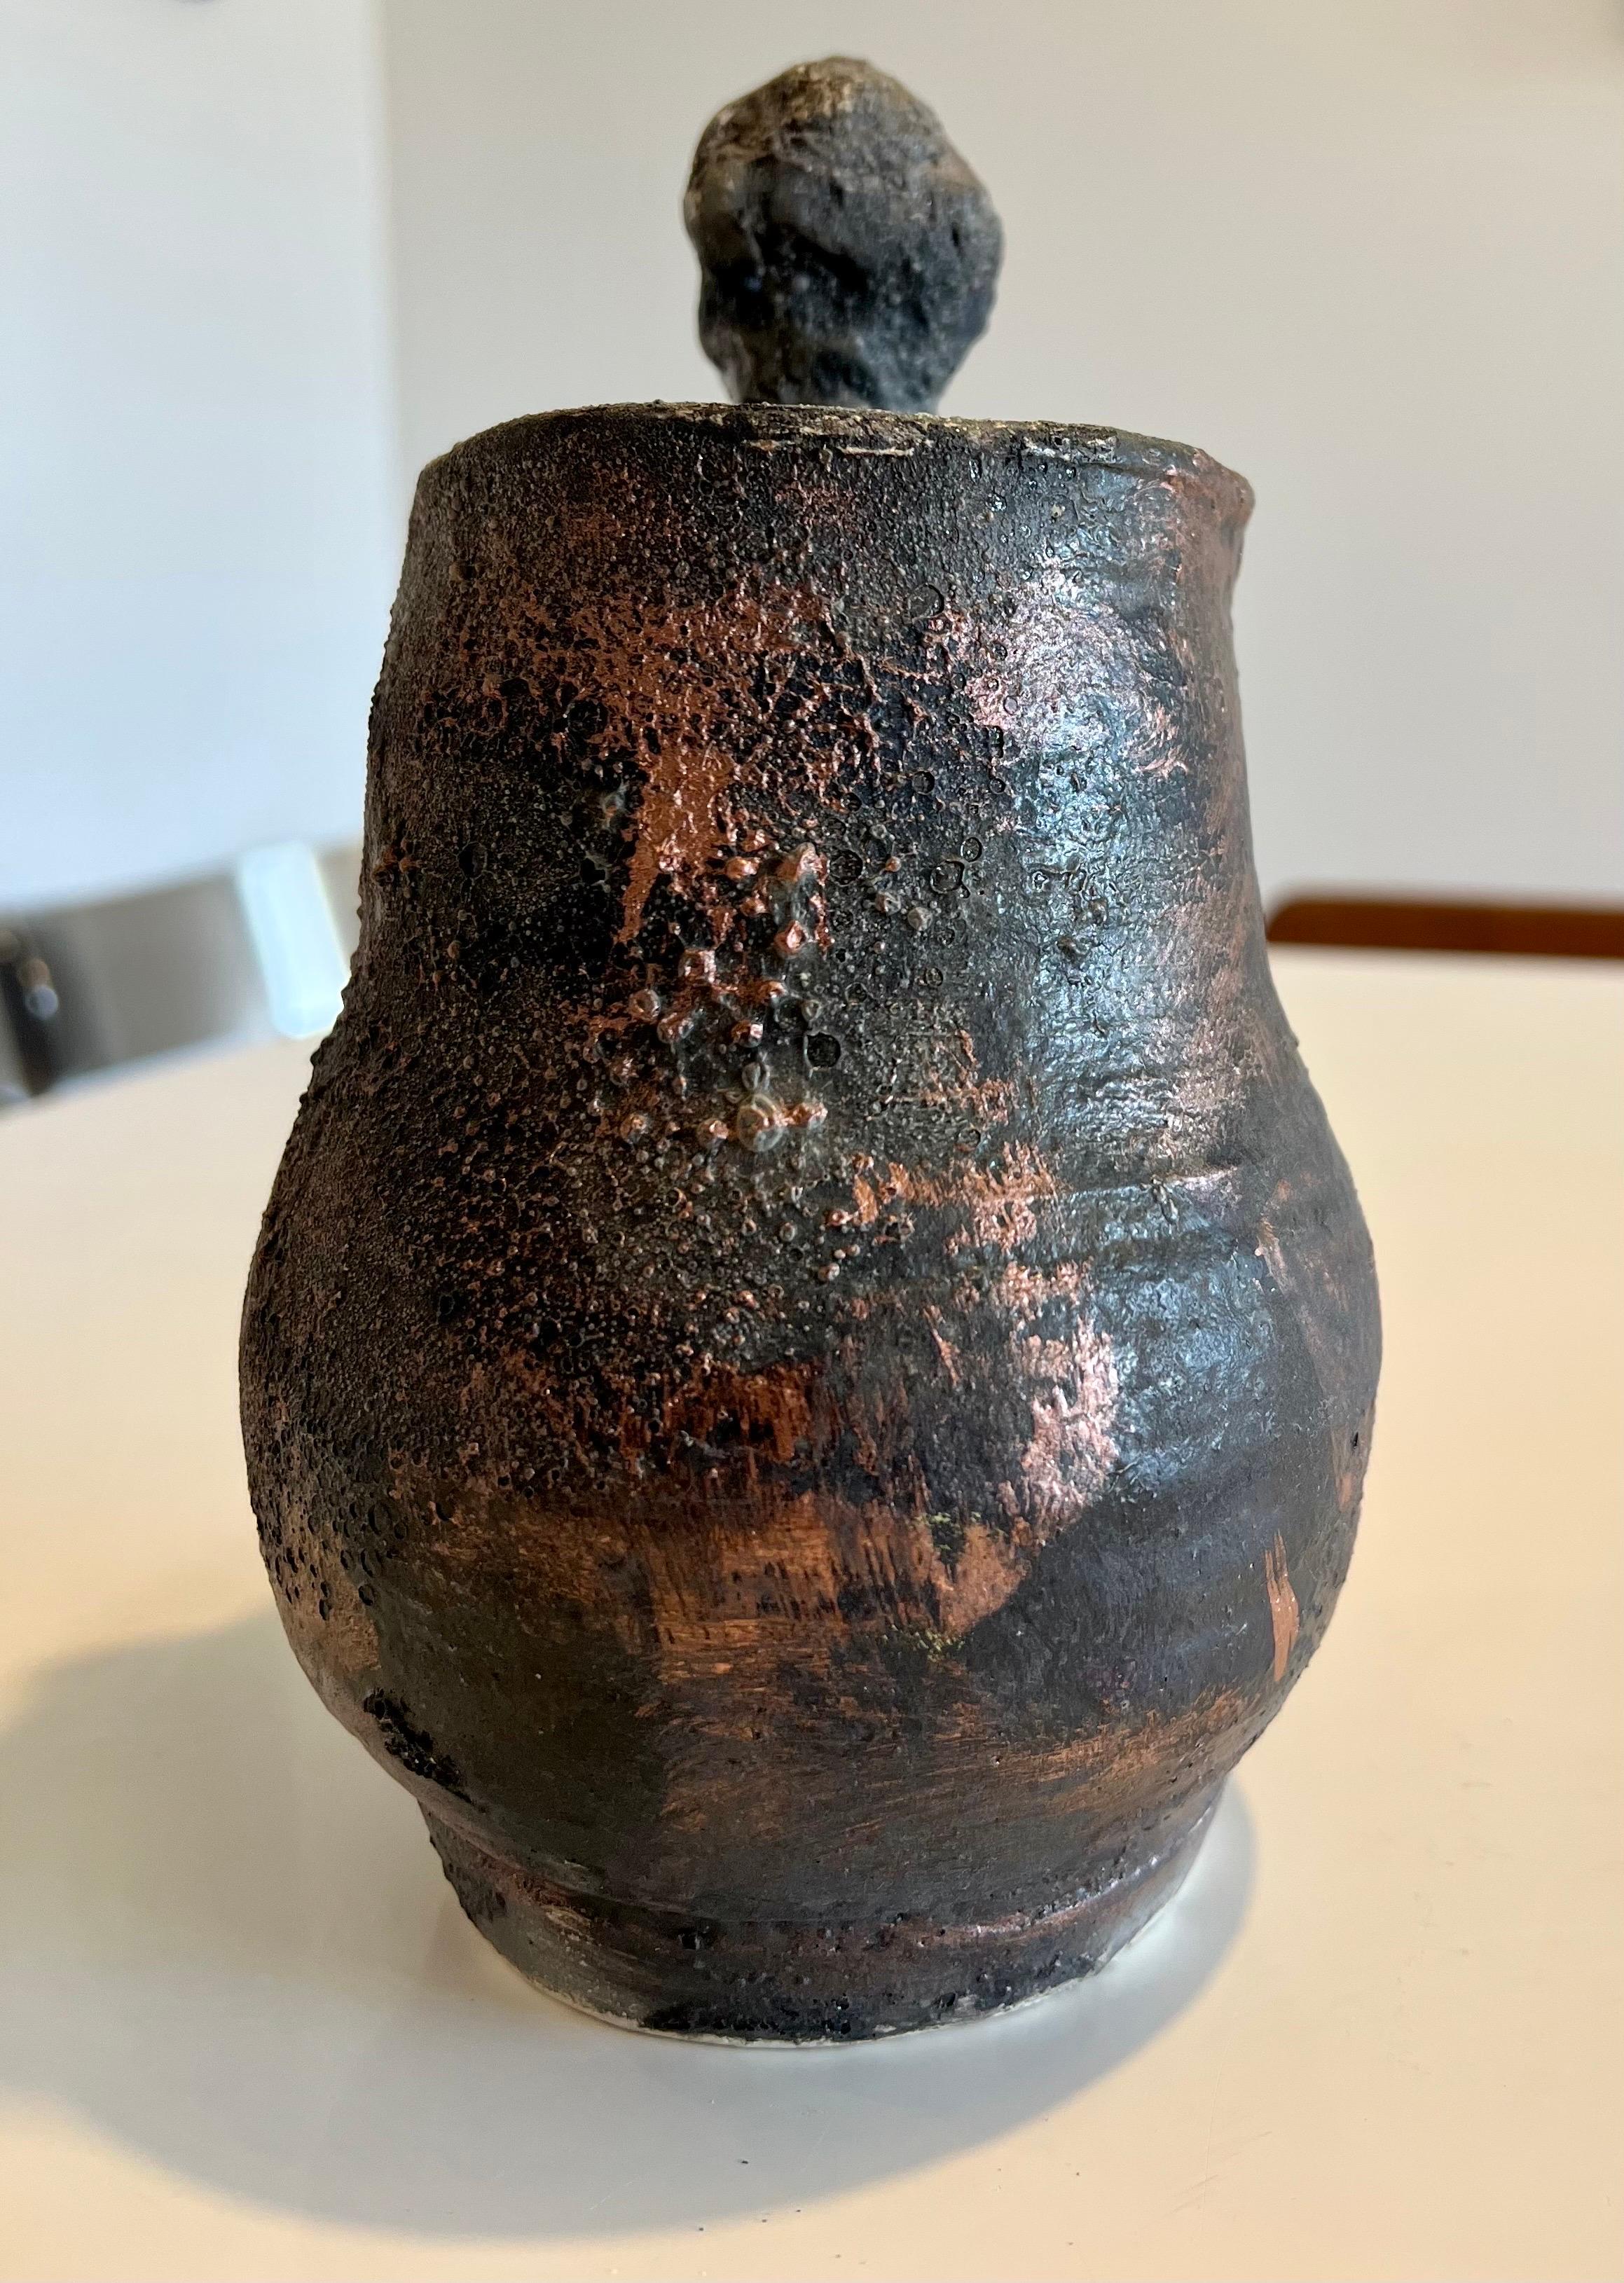 Jenik Cook
Handmade ceramic vase or pot sculpture 
Hand signed by the artist.
Fired clay with a luster bronze painted finish 

Jenik Esterm Simonian Cook is a painter and ceramicist sculptor in the tradition of such visual theorists as Arshile